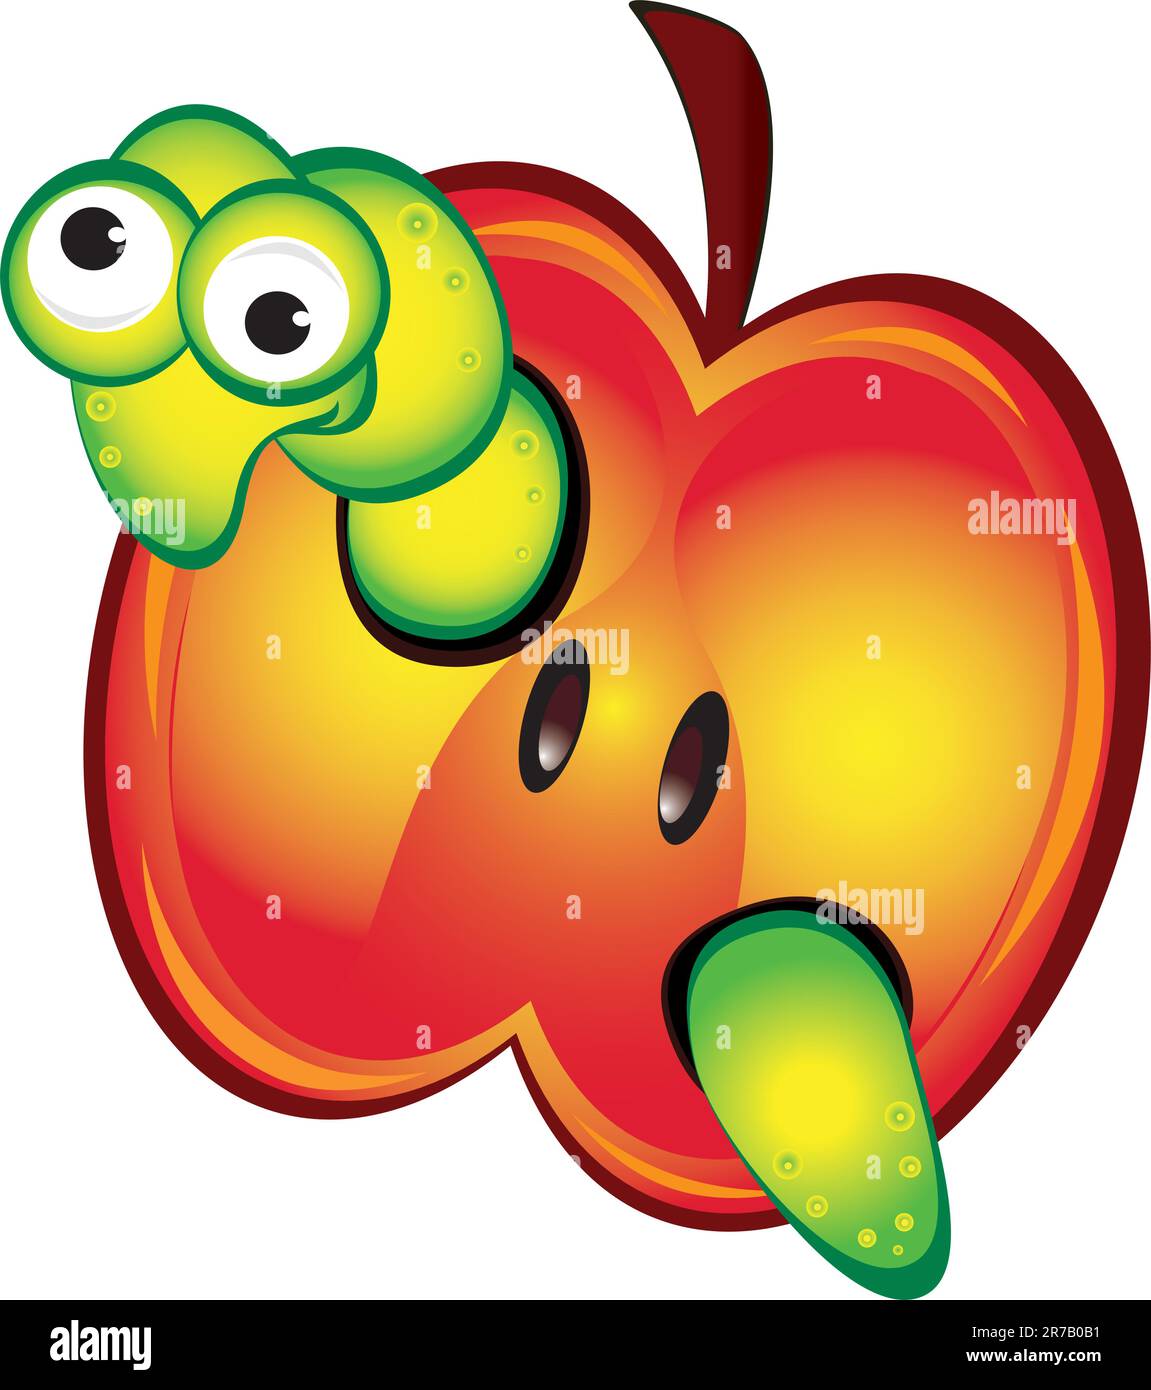 Cartoon illustration of a worm peeking out of an apple Stock Vector